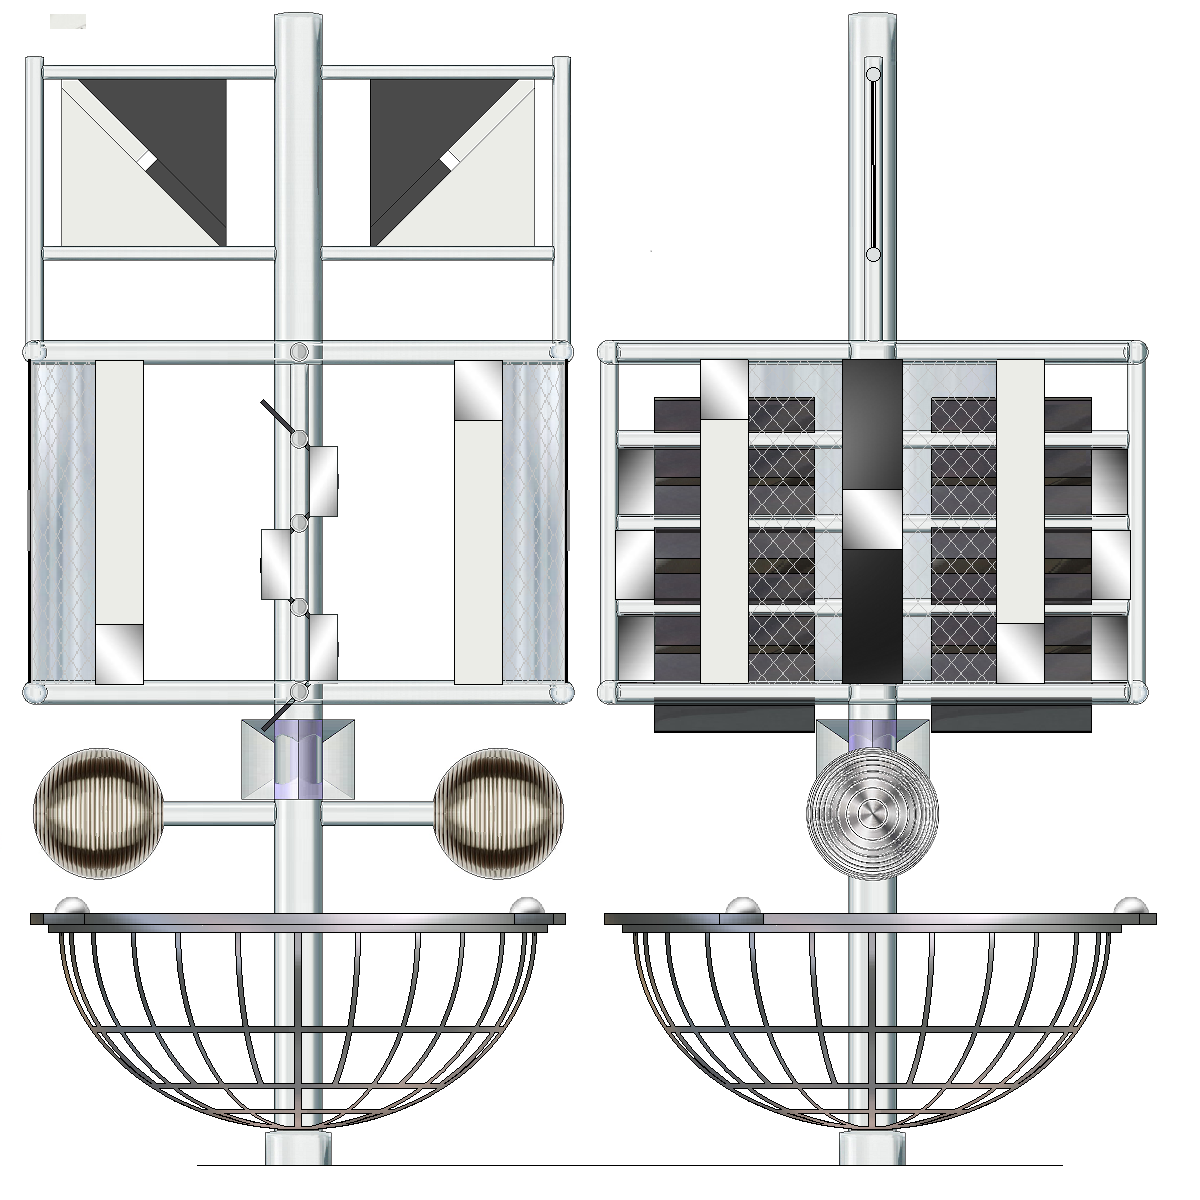 Principal Control Dimensions  Central Column with detectors inner surround and mirrors.png